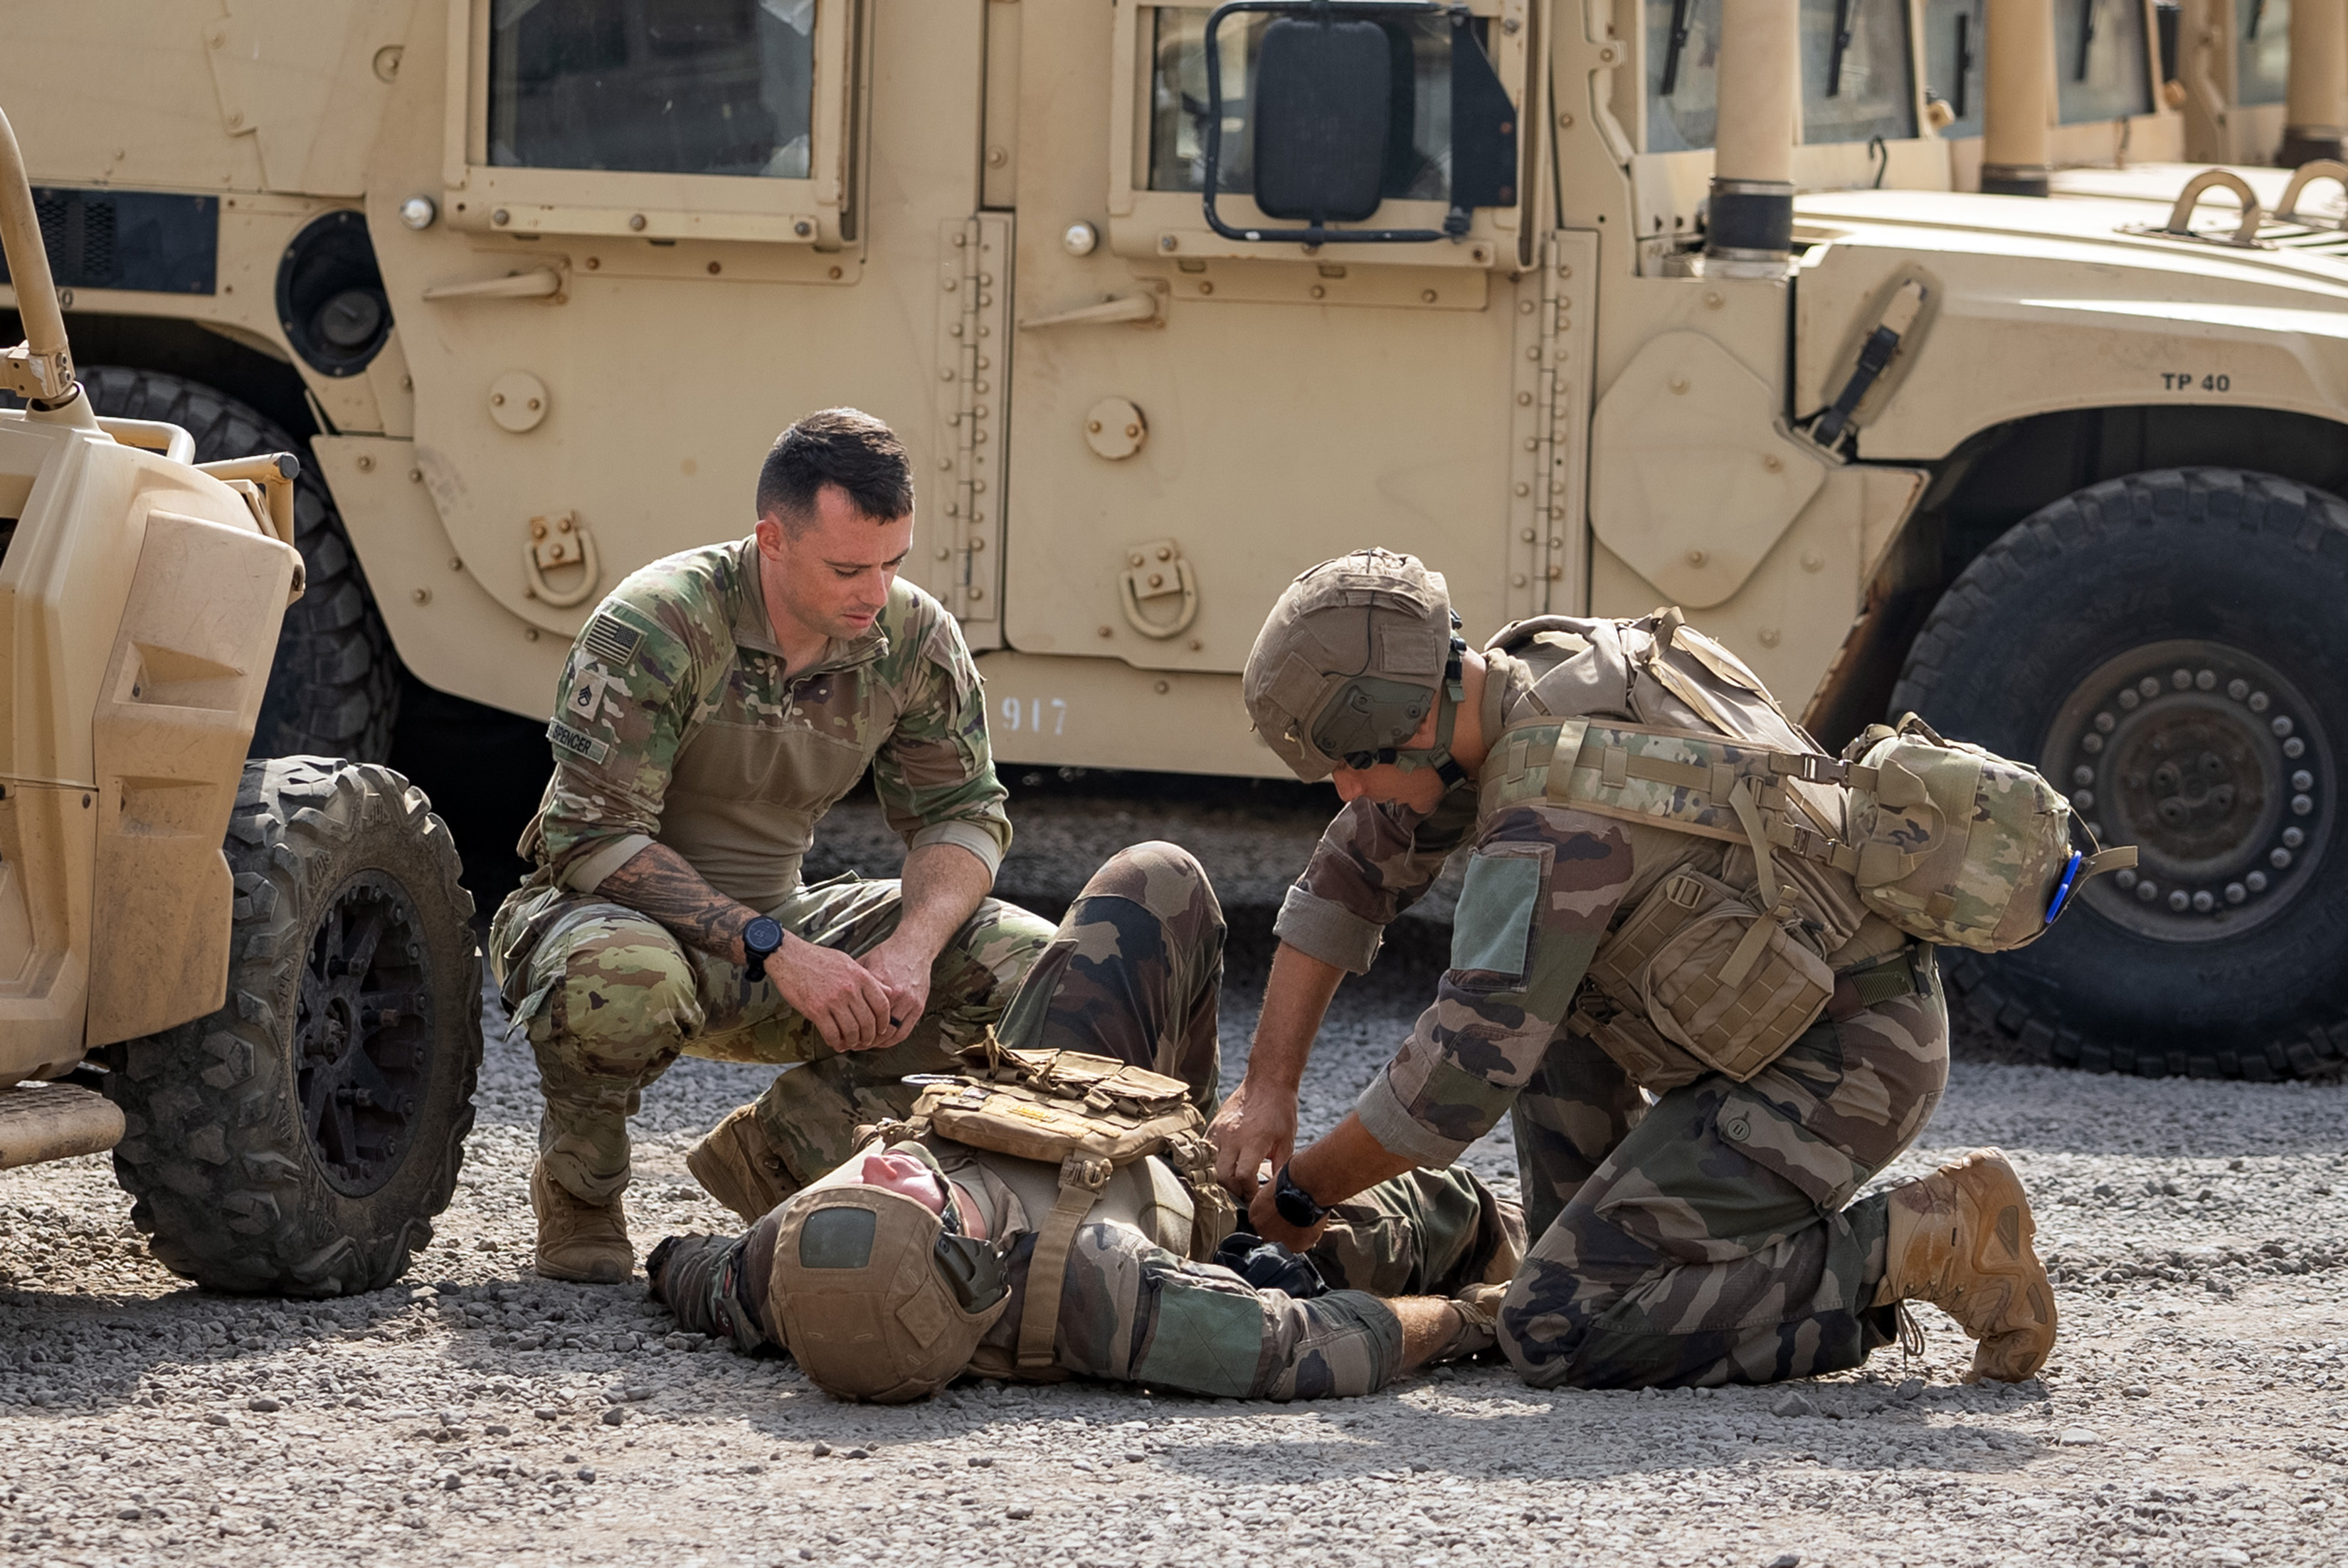 https://www.hoa.africom.mil/Img/25482/File/french-armed-forces-join-cjtf-hoa-for-casualty-care